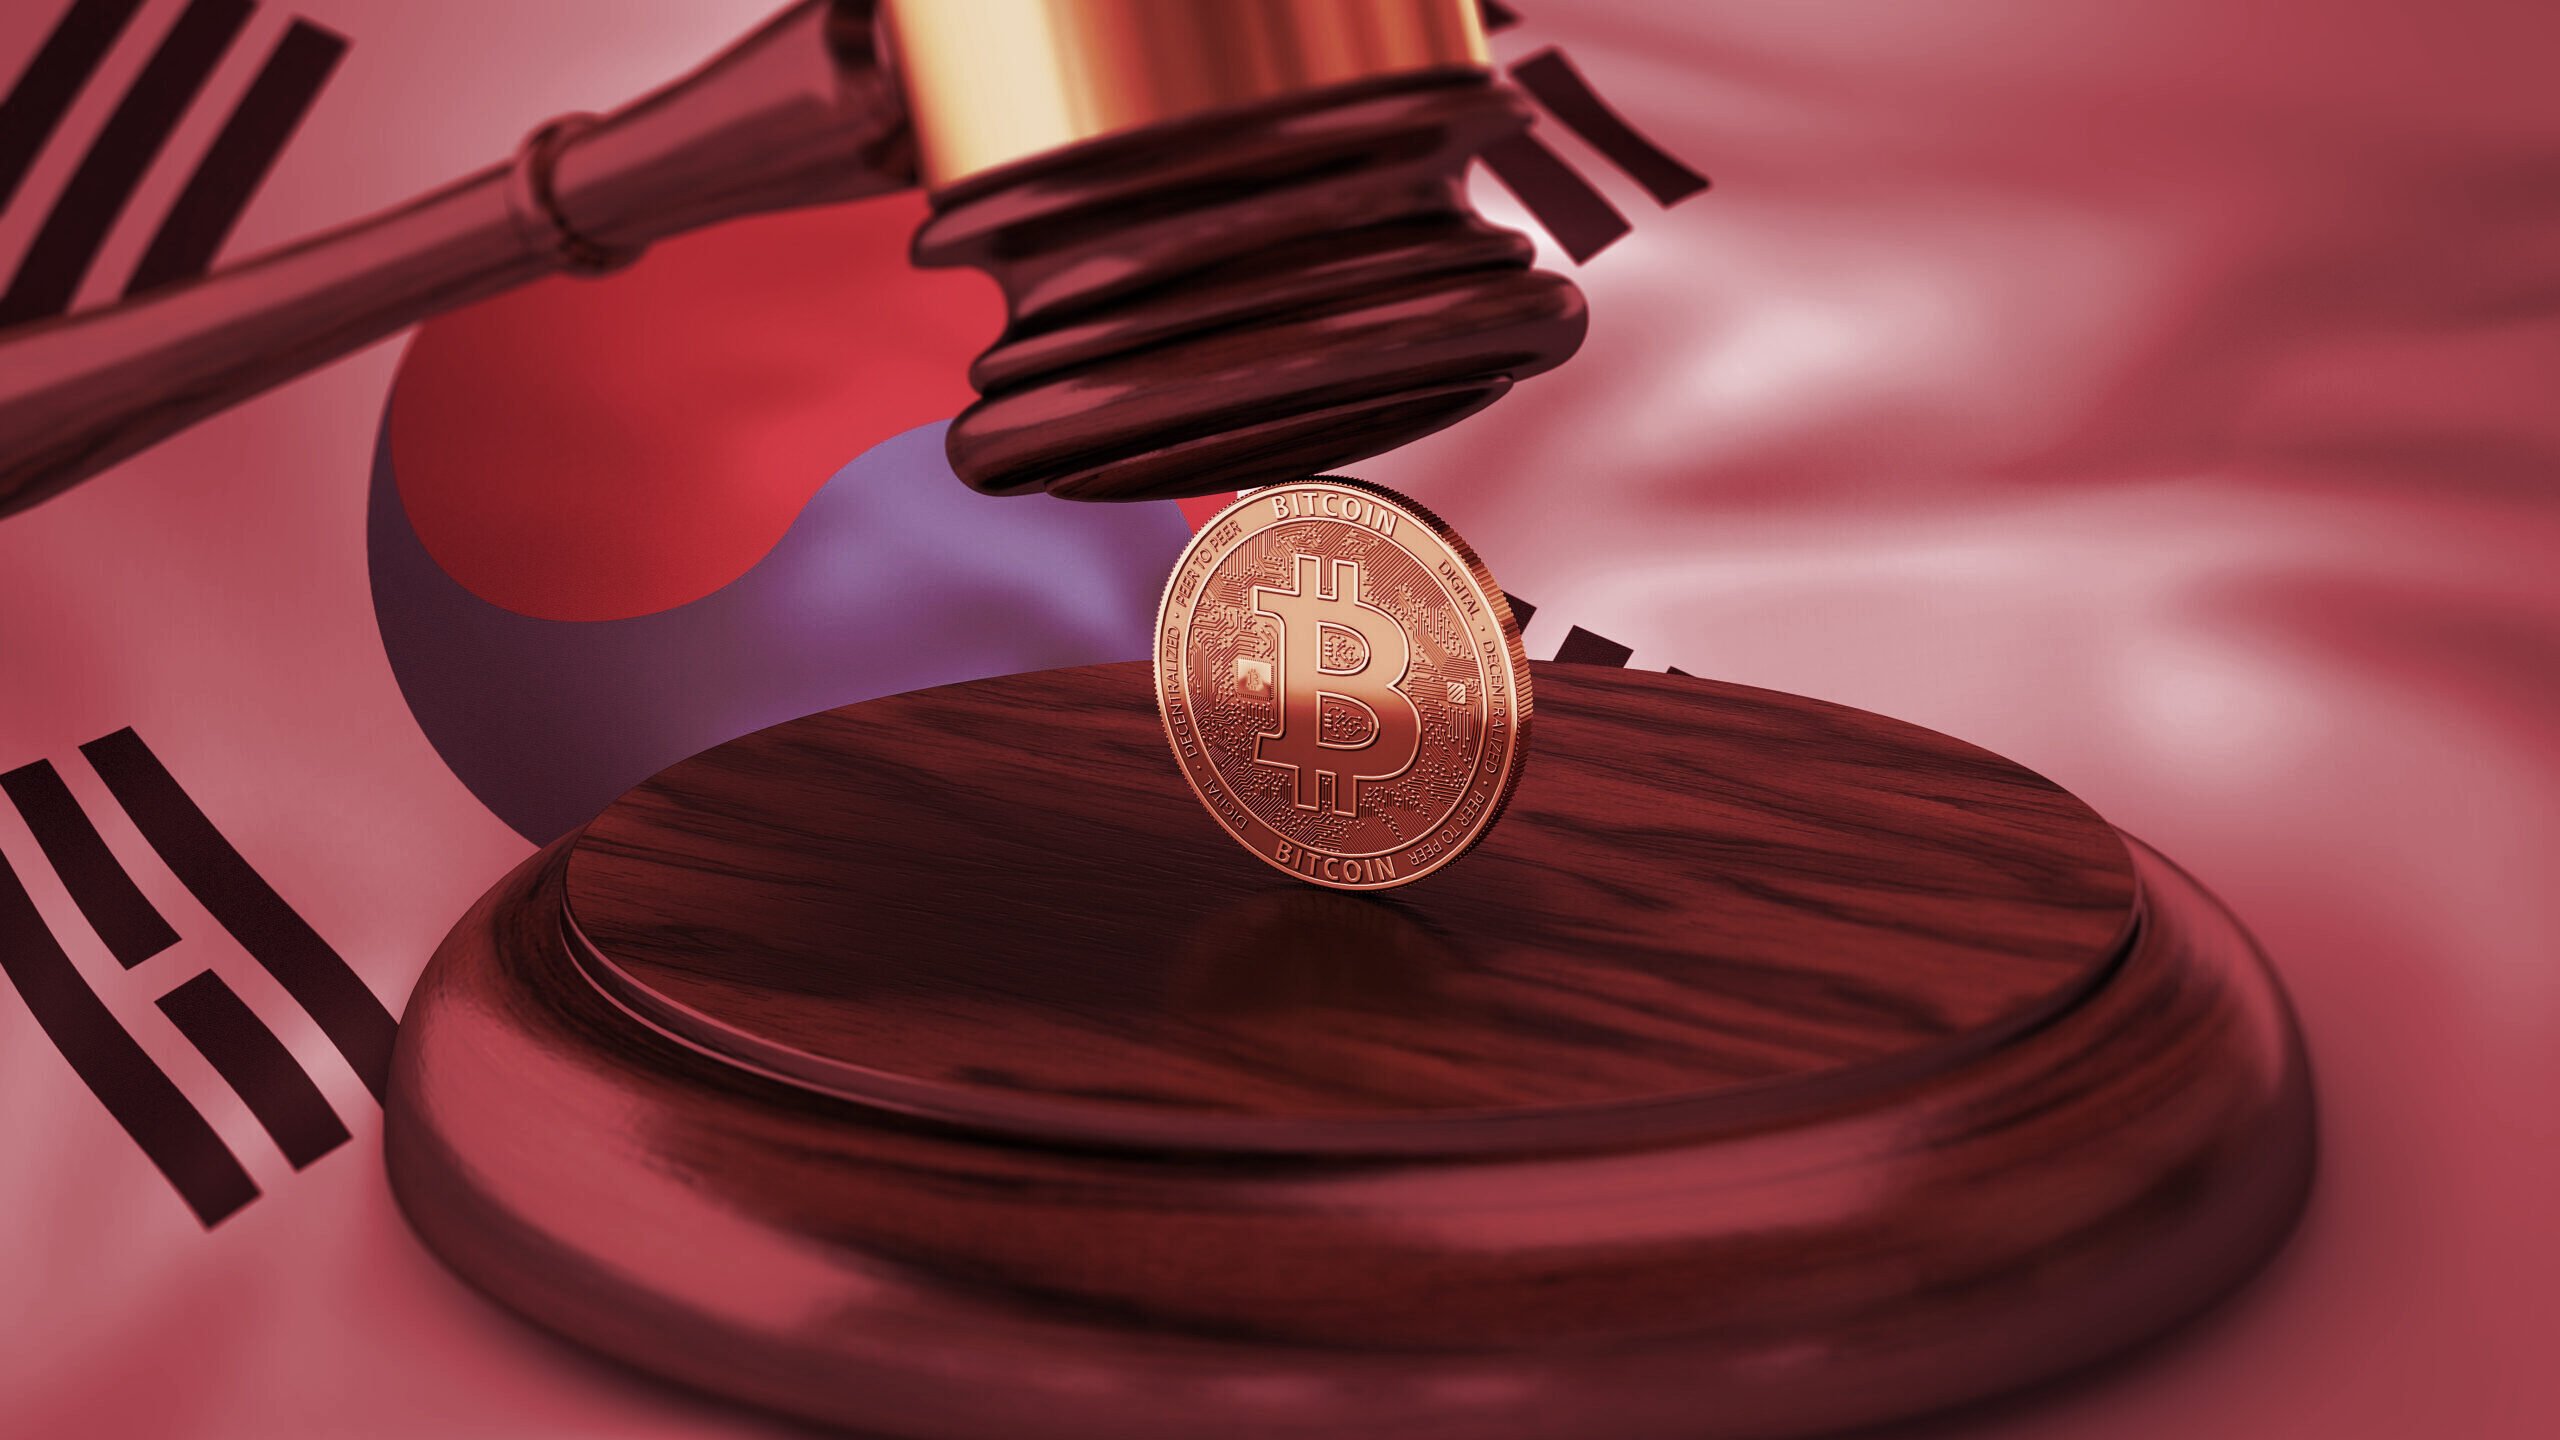 South Korea to Block KuCoin, Poloniex in Crackdown on Unregistered Crypto Exchanges